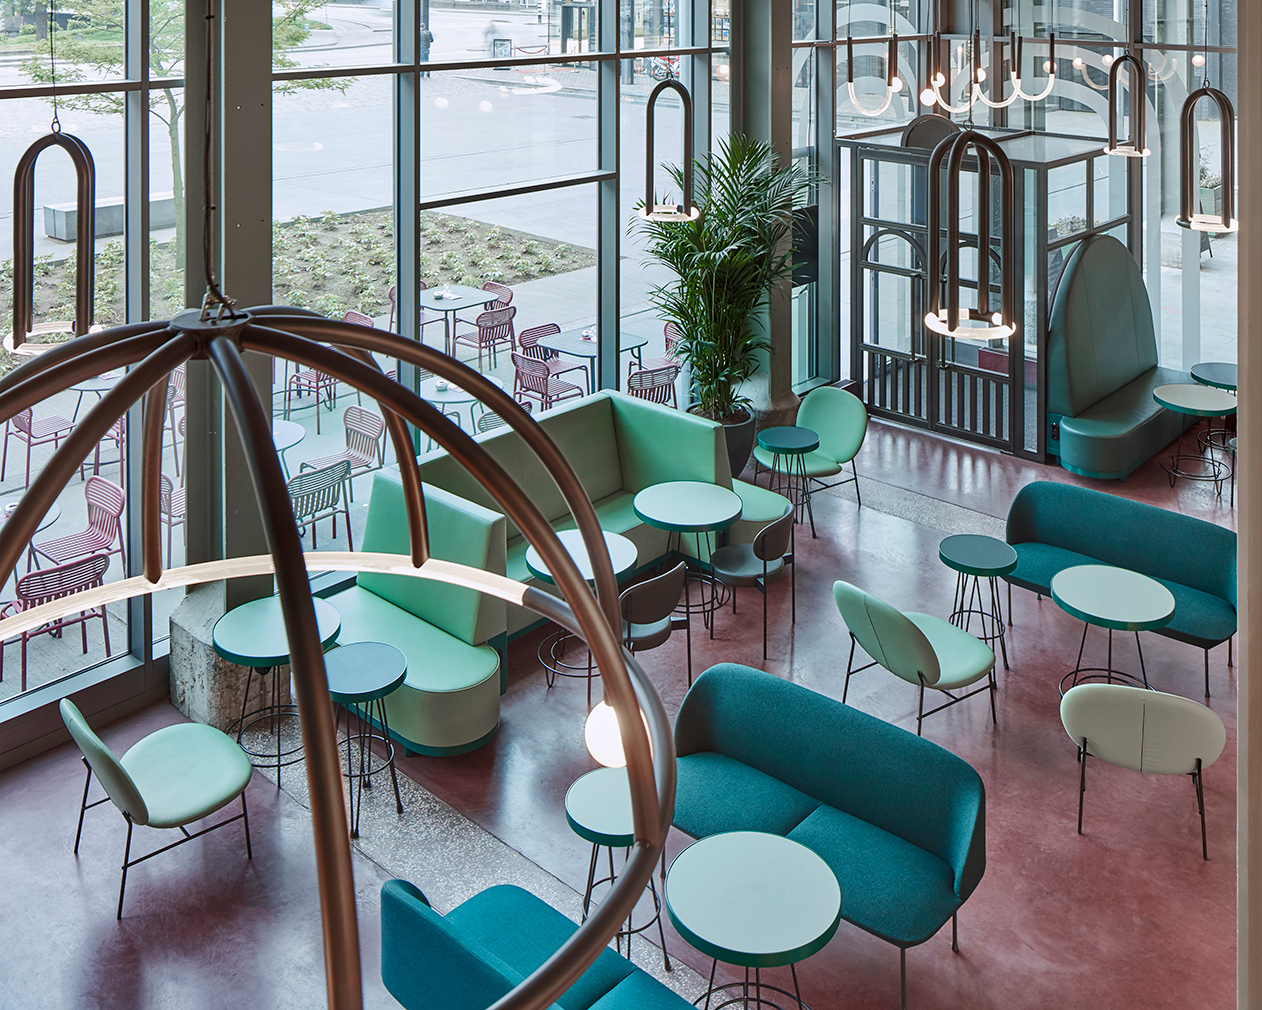 Studio Modijefsky serves up a feast of colour at new Maastricht restaurant The Commons